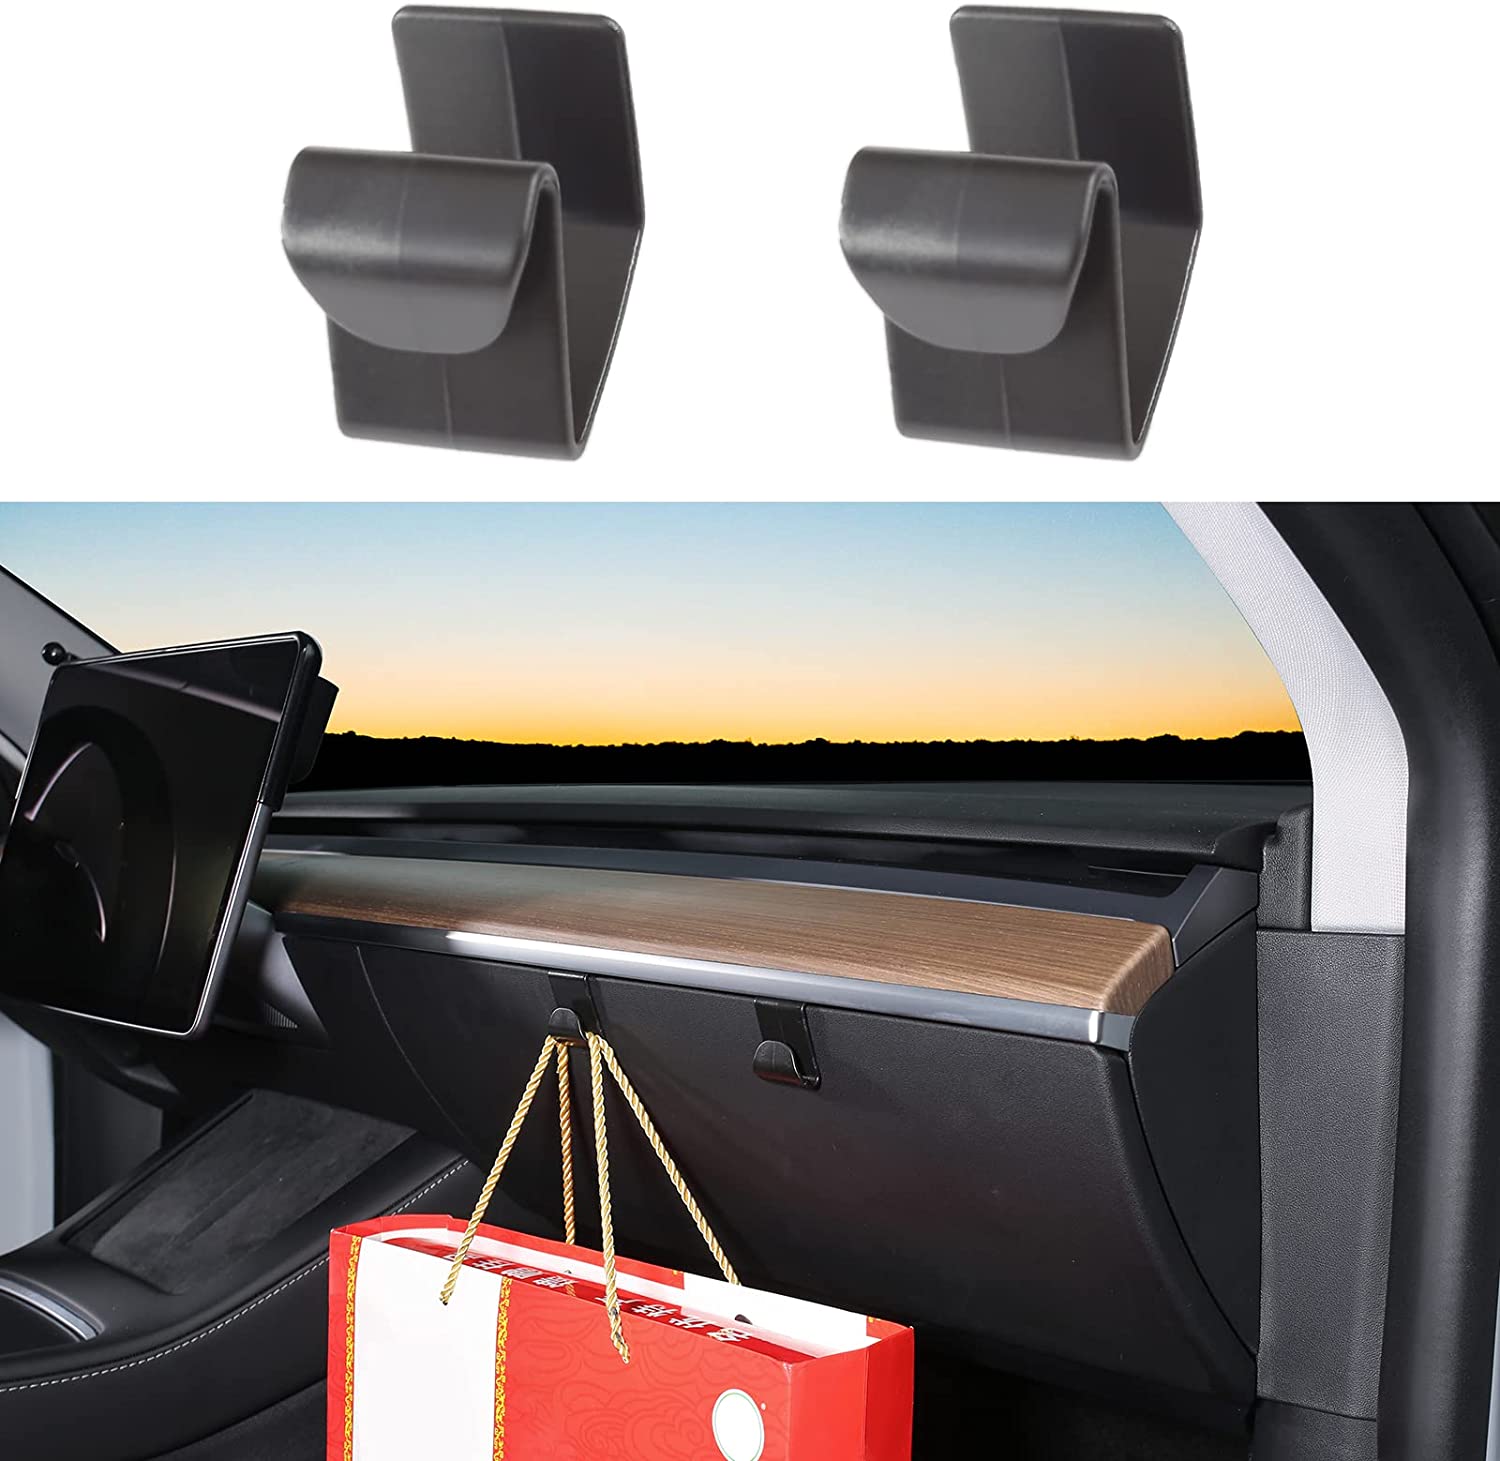 Glove Box Hook for Tesla Model 3 2017-2023.10 & USA/China Model Y 2020-2024 - Tesery Official Store